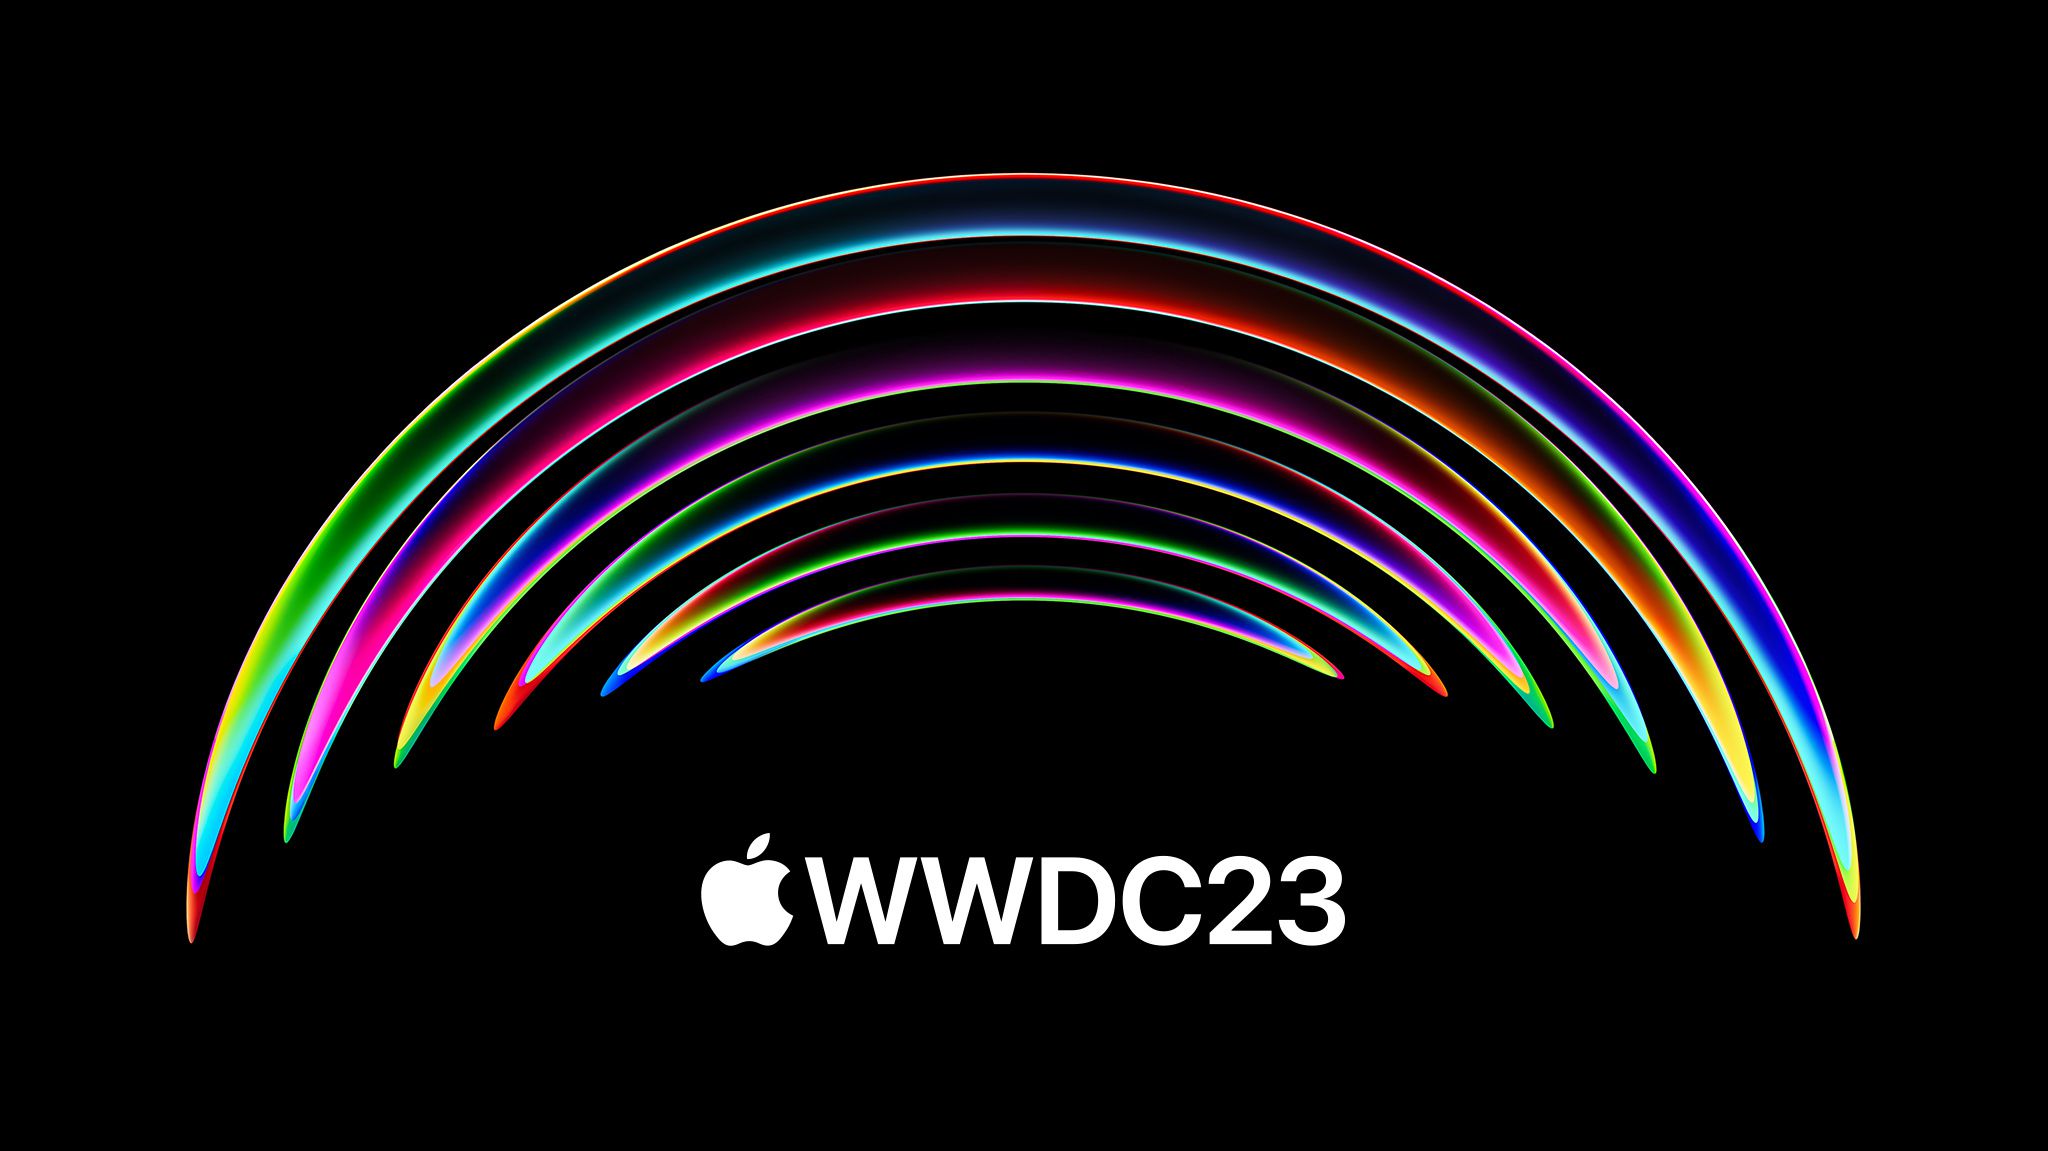 Apple Announces WWDC 2023 Event Taking Place June 5 to 9